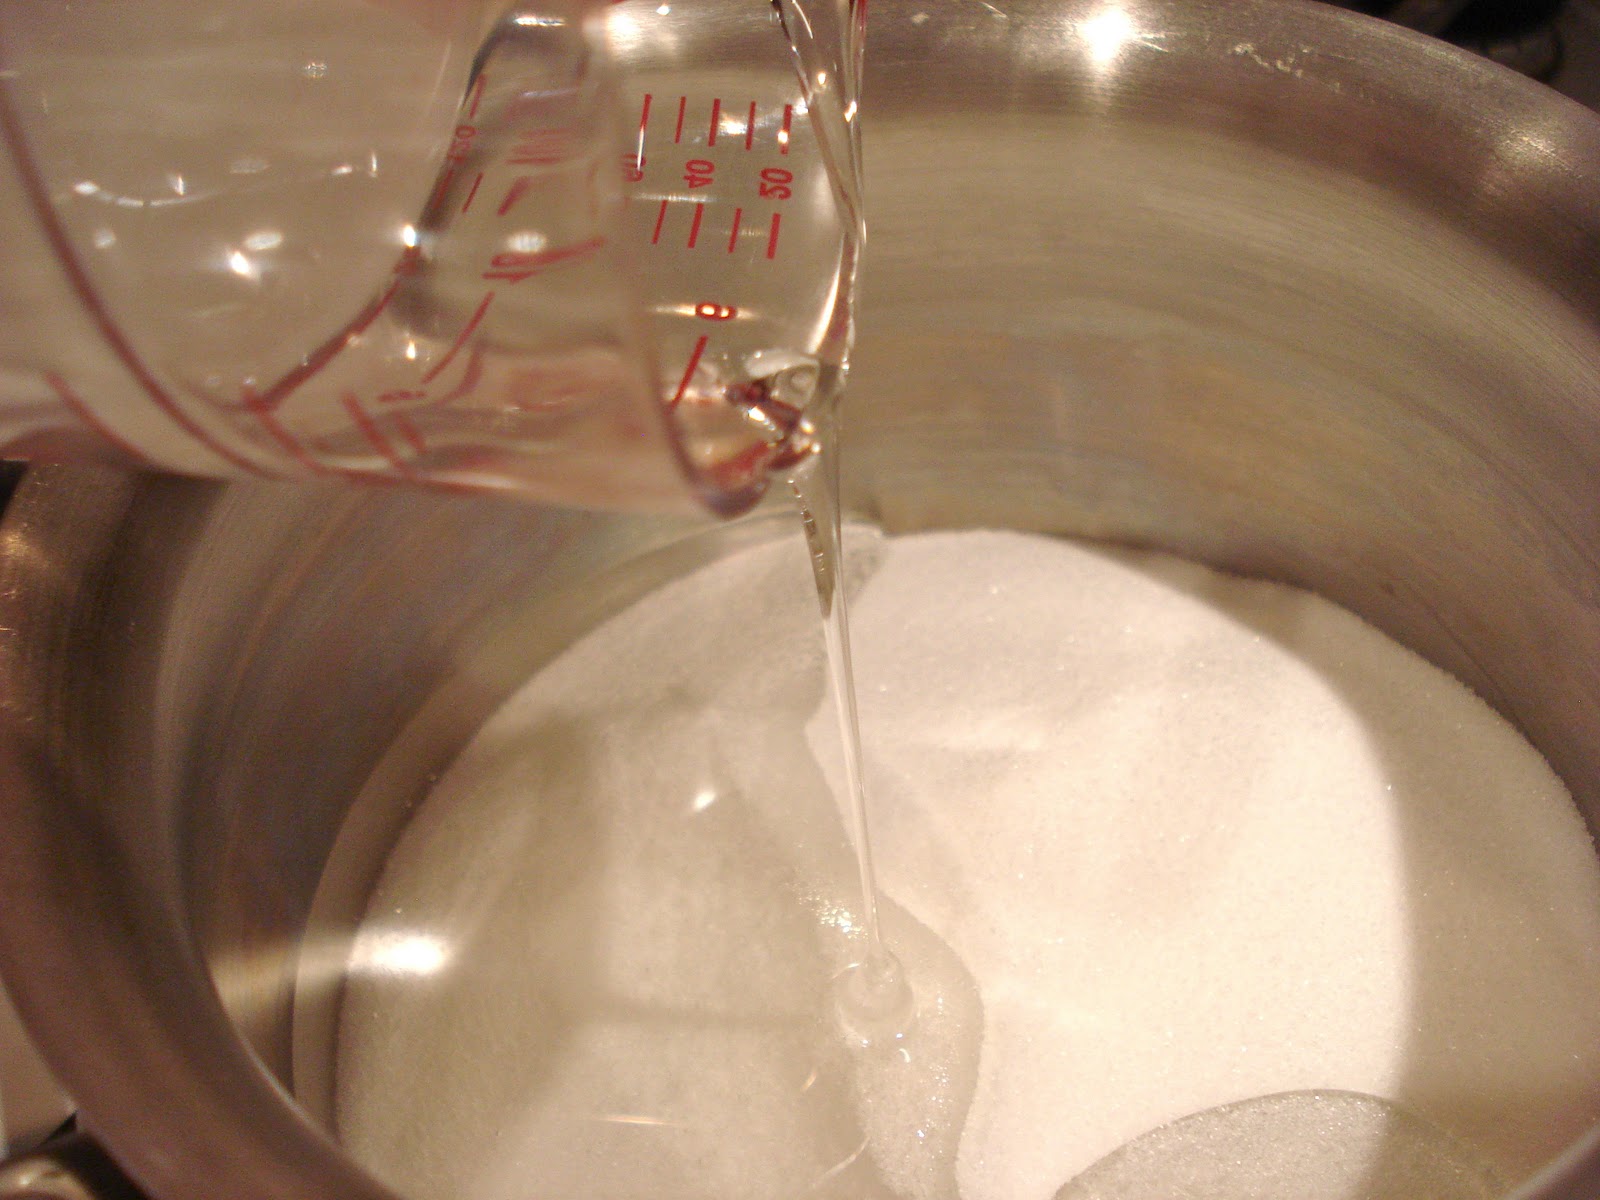 bowl, whisk together the sugar and vegetable oil until well combined.